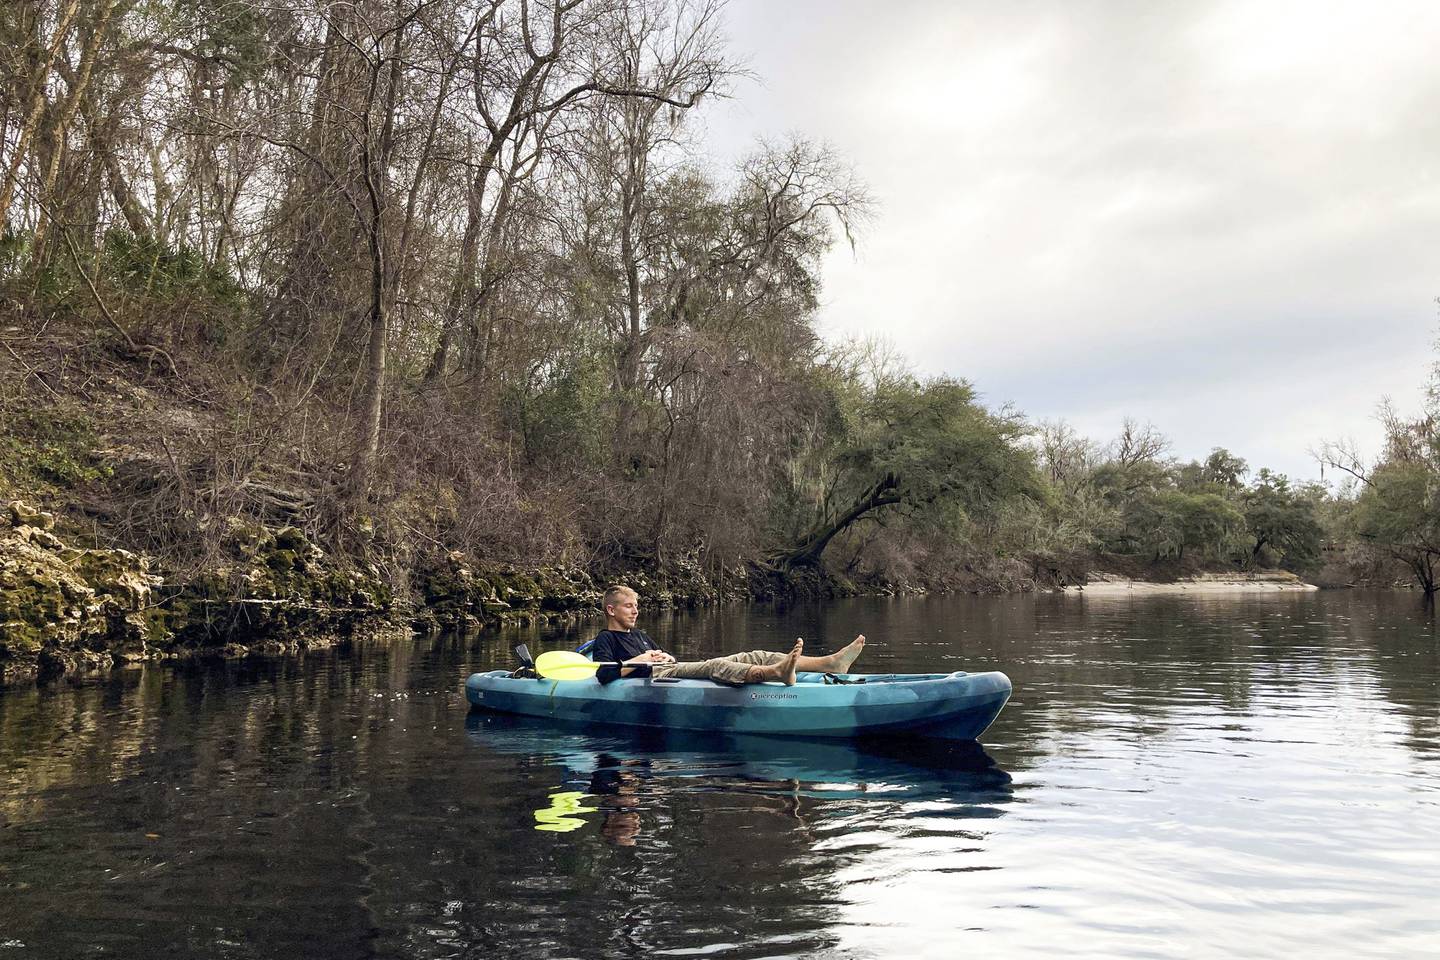 It was so peaceful paddling the Suwannee... before the downpour.